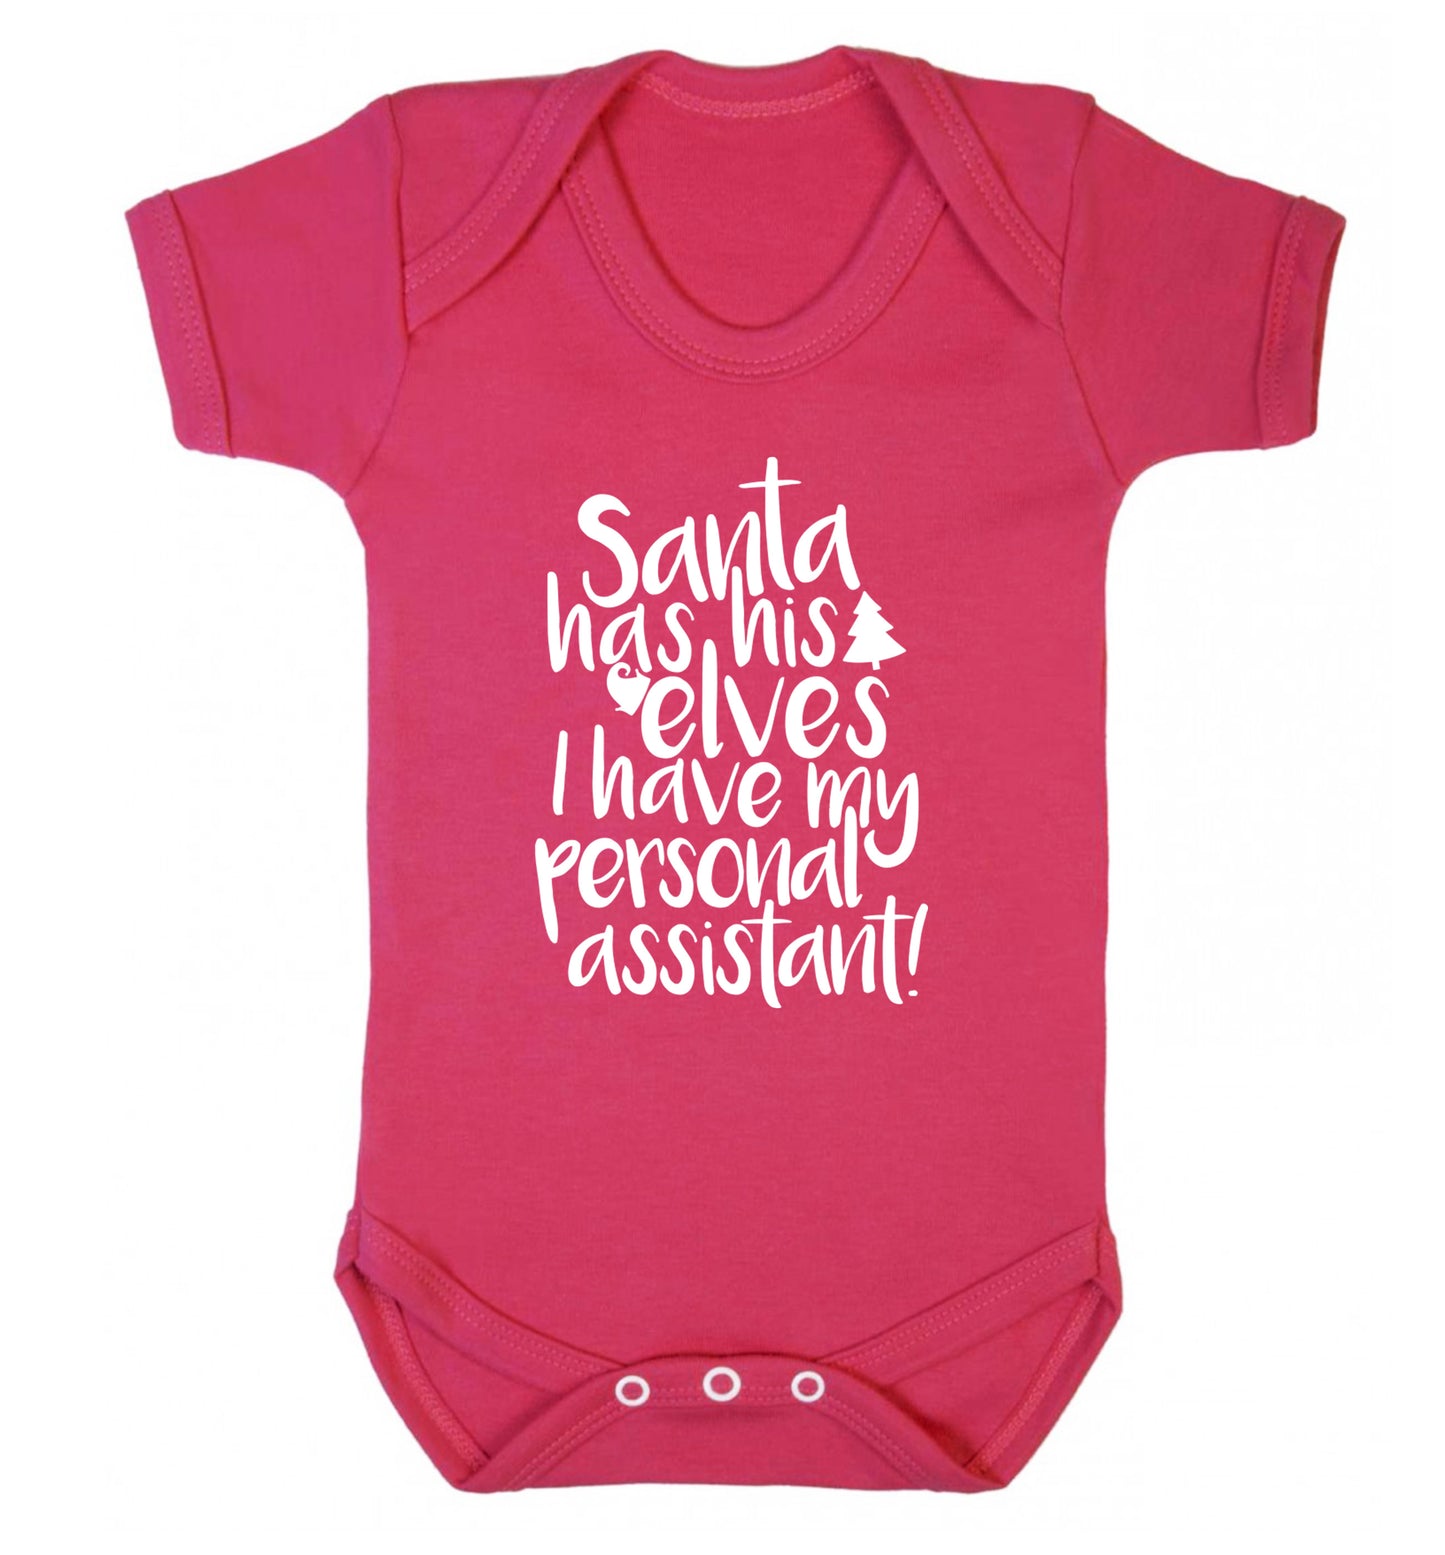 Santa has his elves I have my personal assistant Baby Vest dark pink 18-24 months